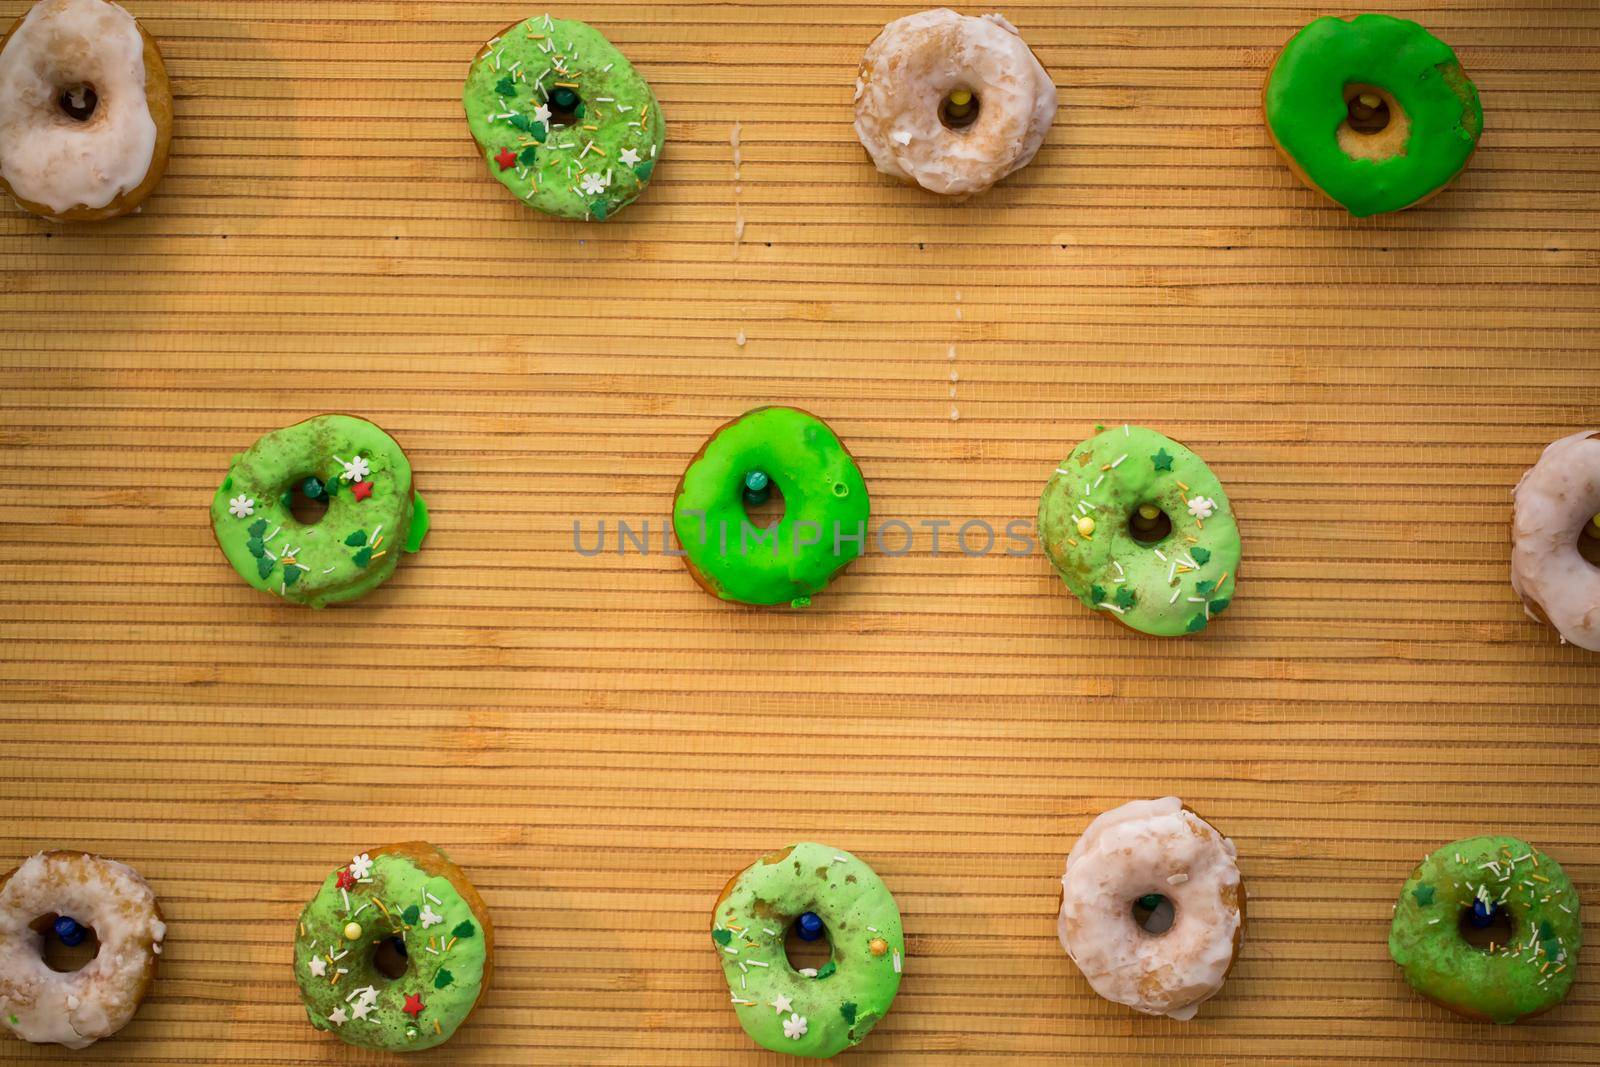 Decor of glazed donuts on a wooden background by StudioPeace